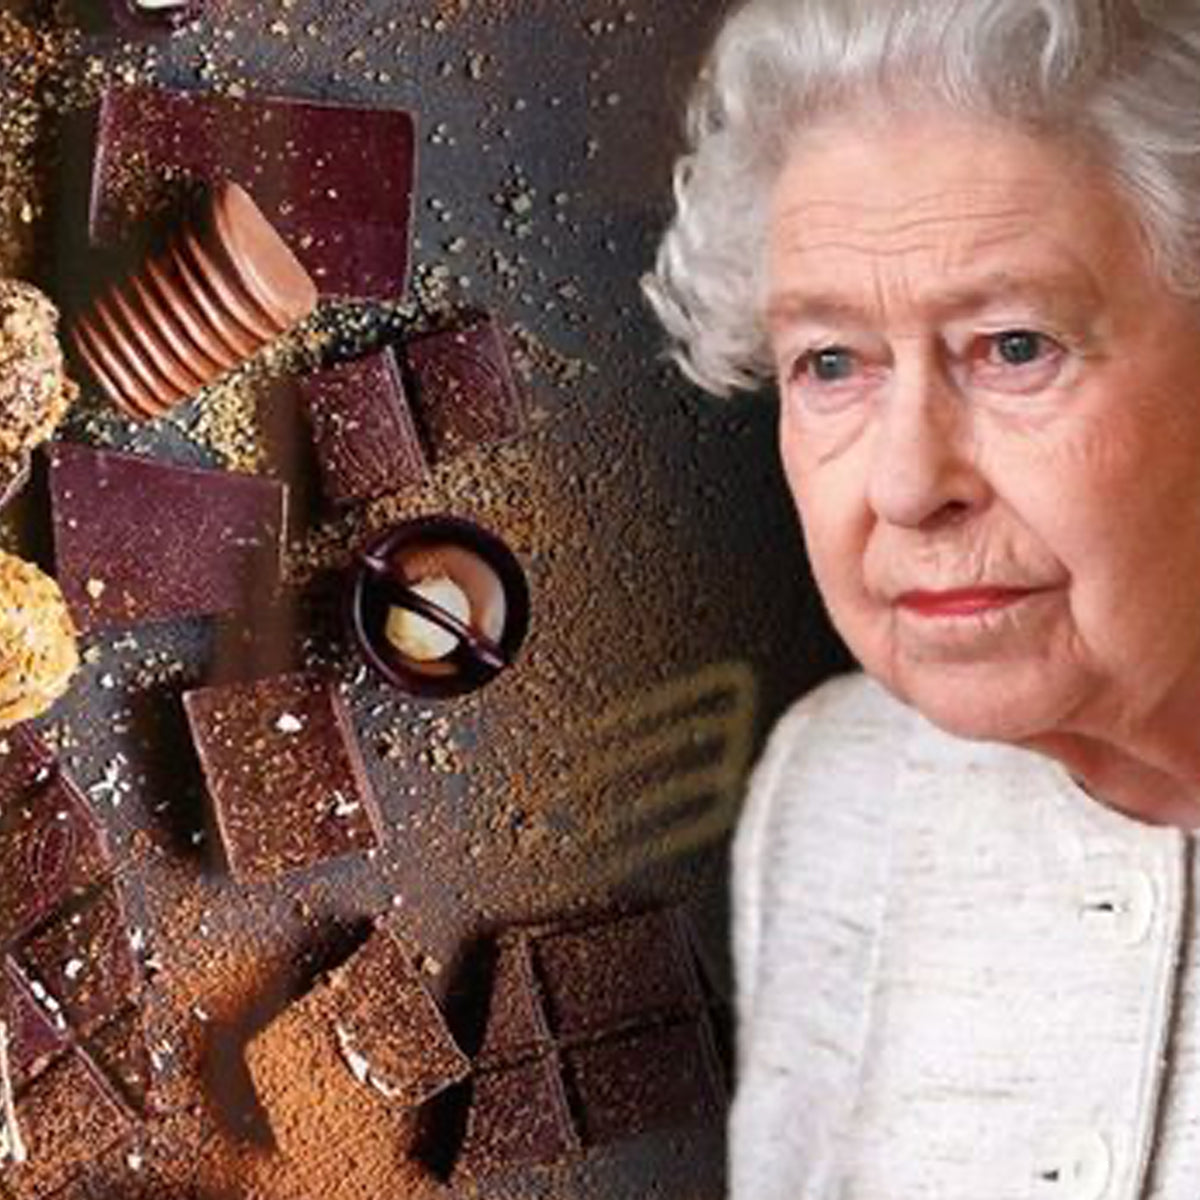 What did Queen Elizabeth have, when she said “I want to eat a chocolat